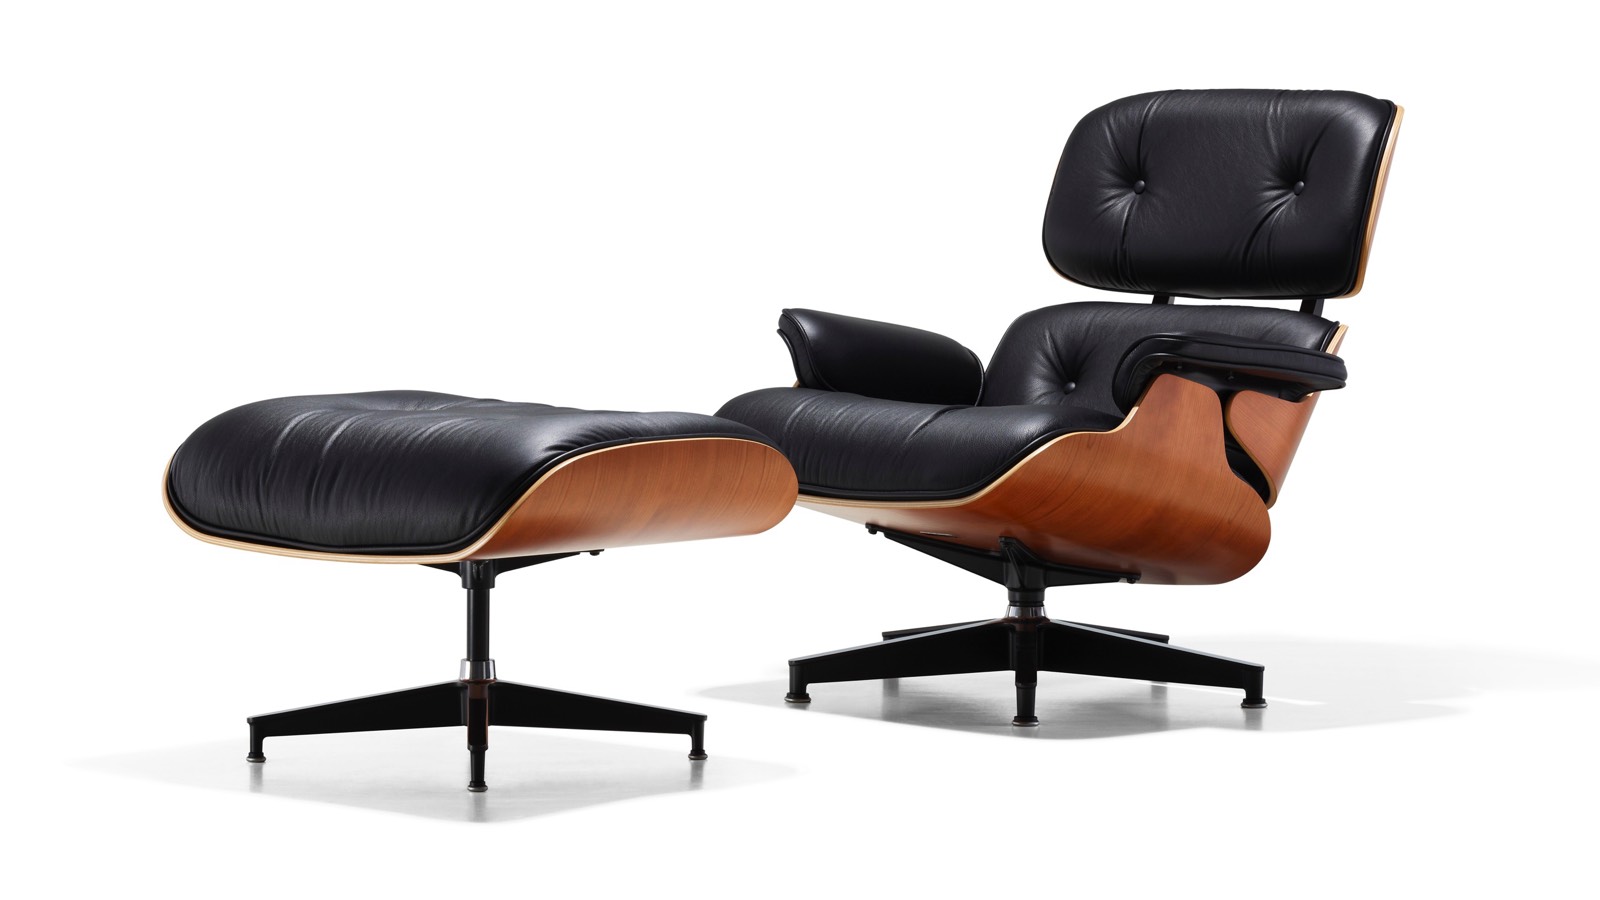 Black leather Eames Lounge Chair and Ottoman with a wood veneer shell, viewed from a 45-degree angle. 